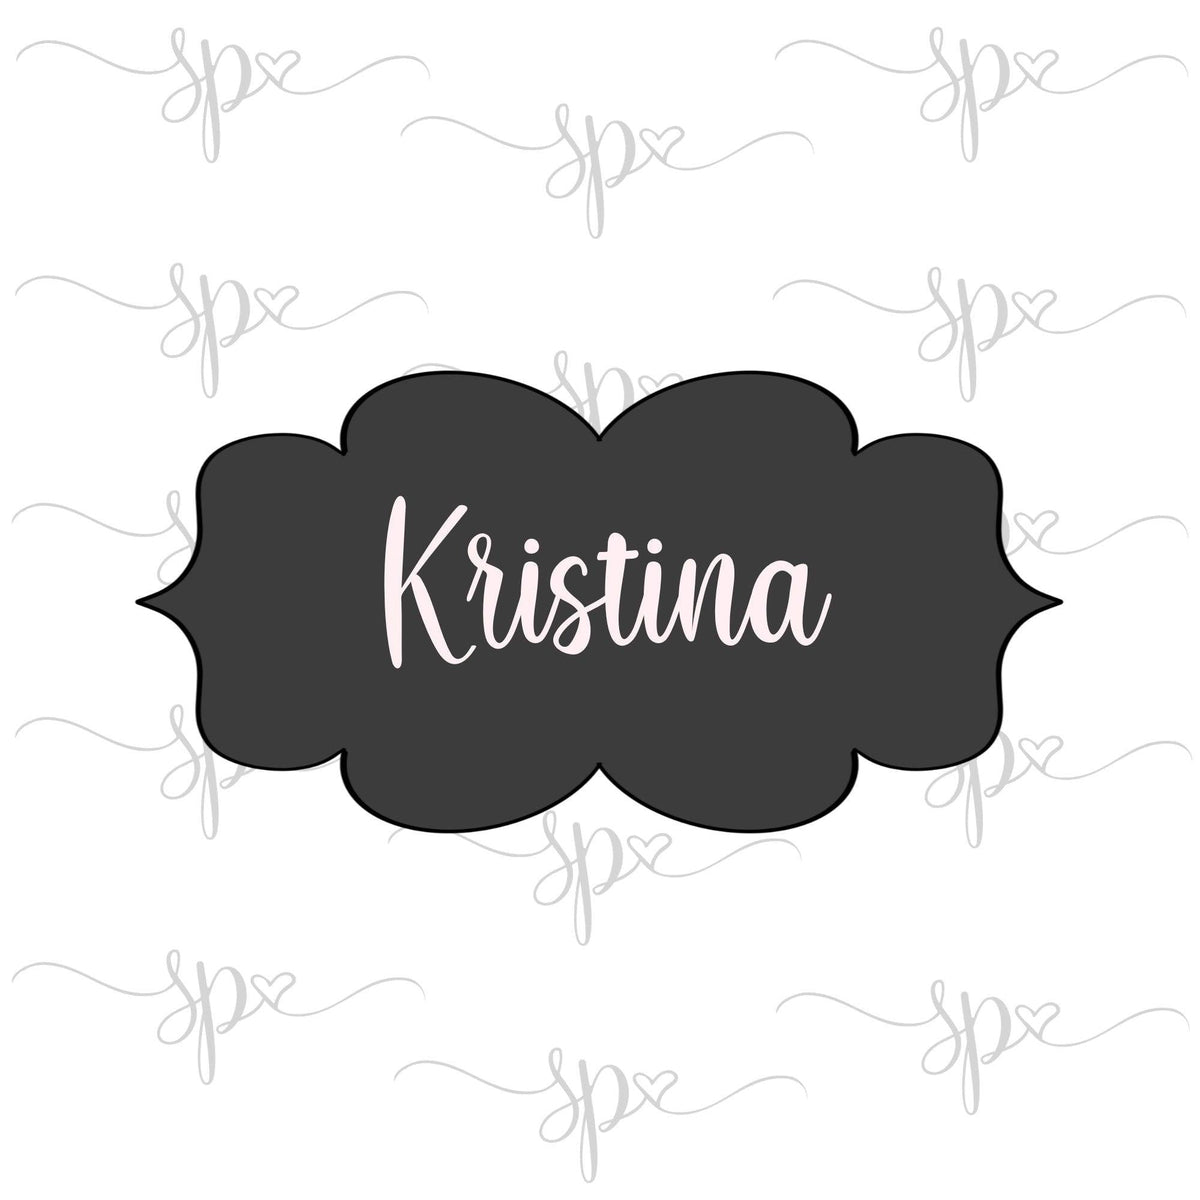 Kristina Plaque Cookie Cutter - Sweetleigh 